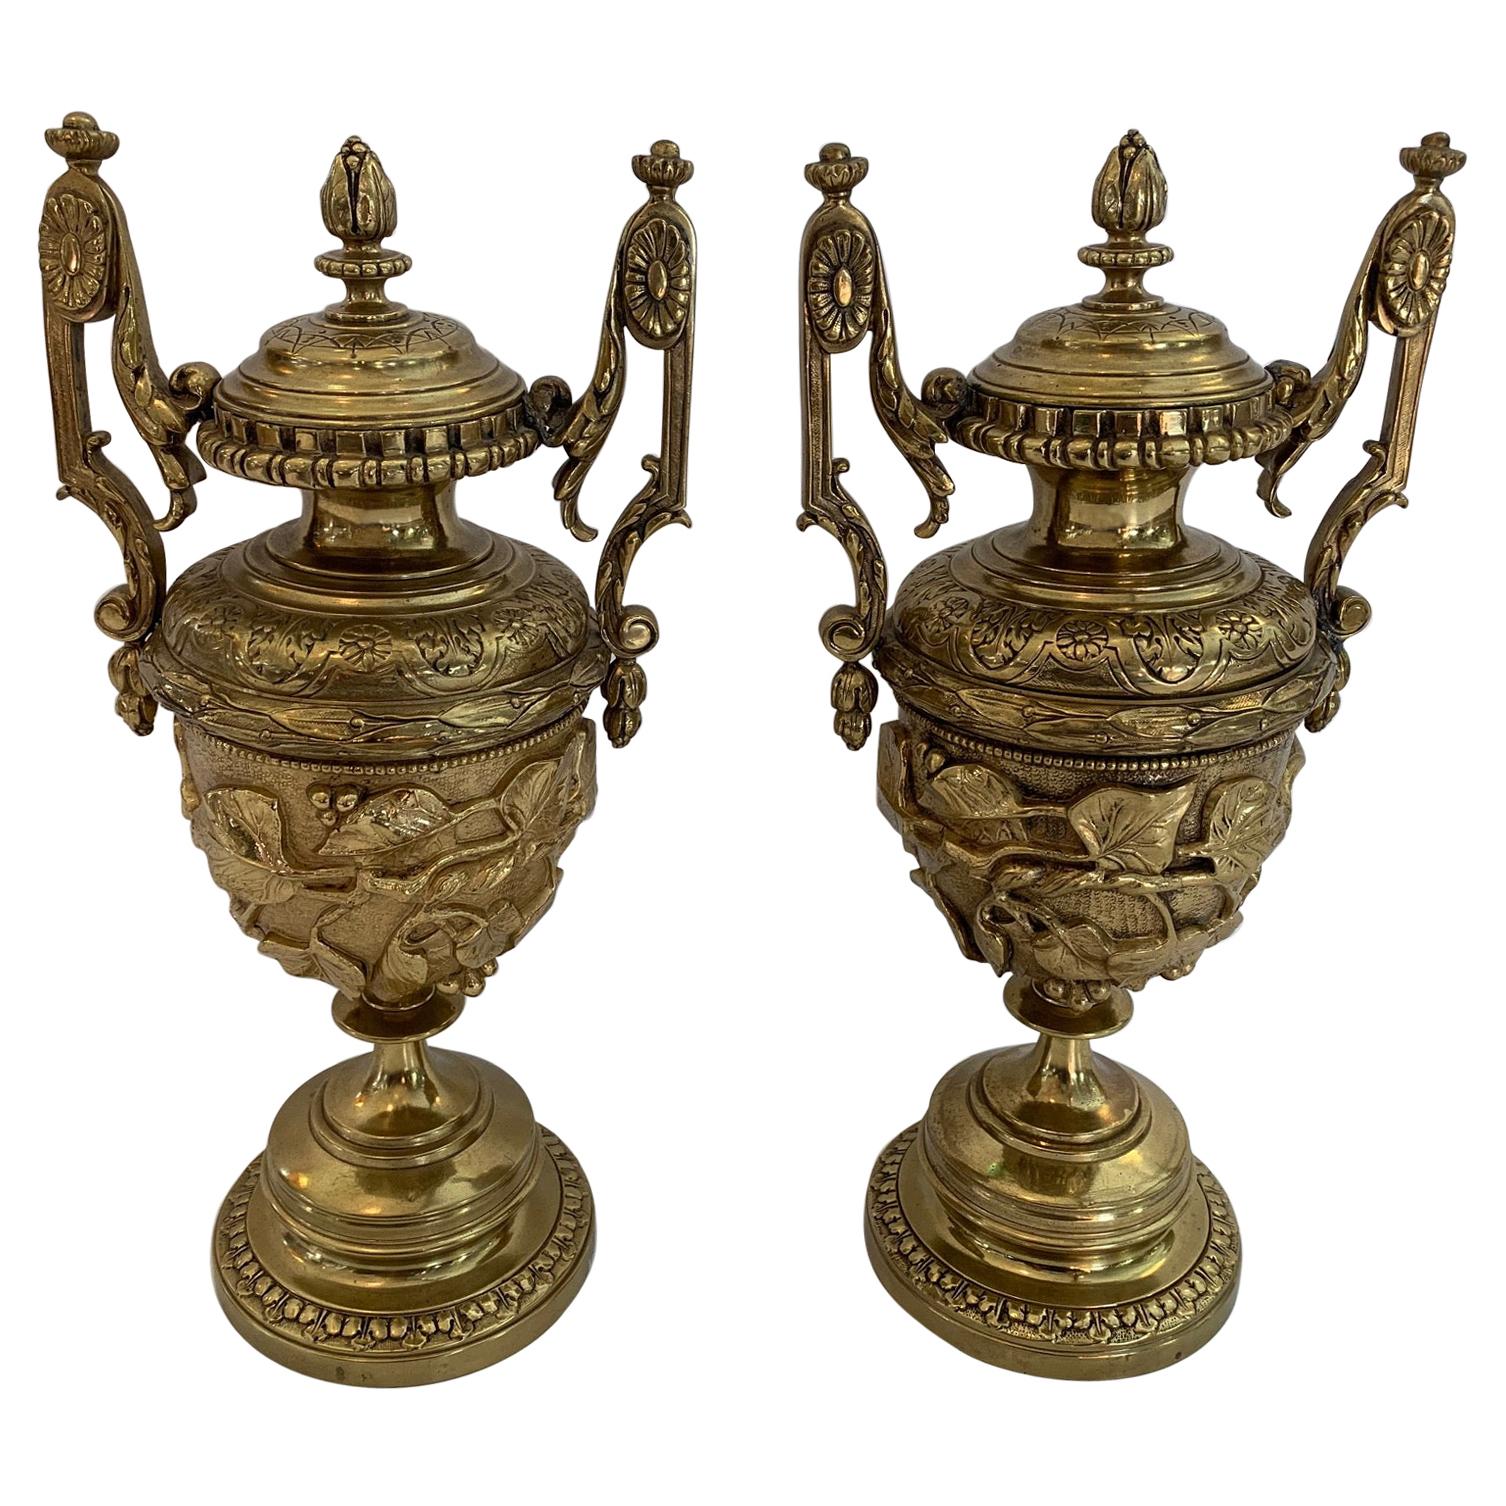 Gorgeous Ornate Pair of Revival Style Cast Brass Relief Lidded Urns